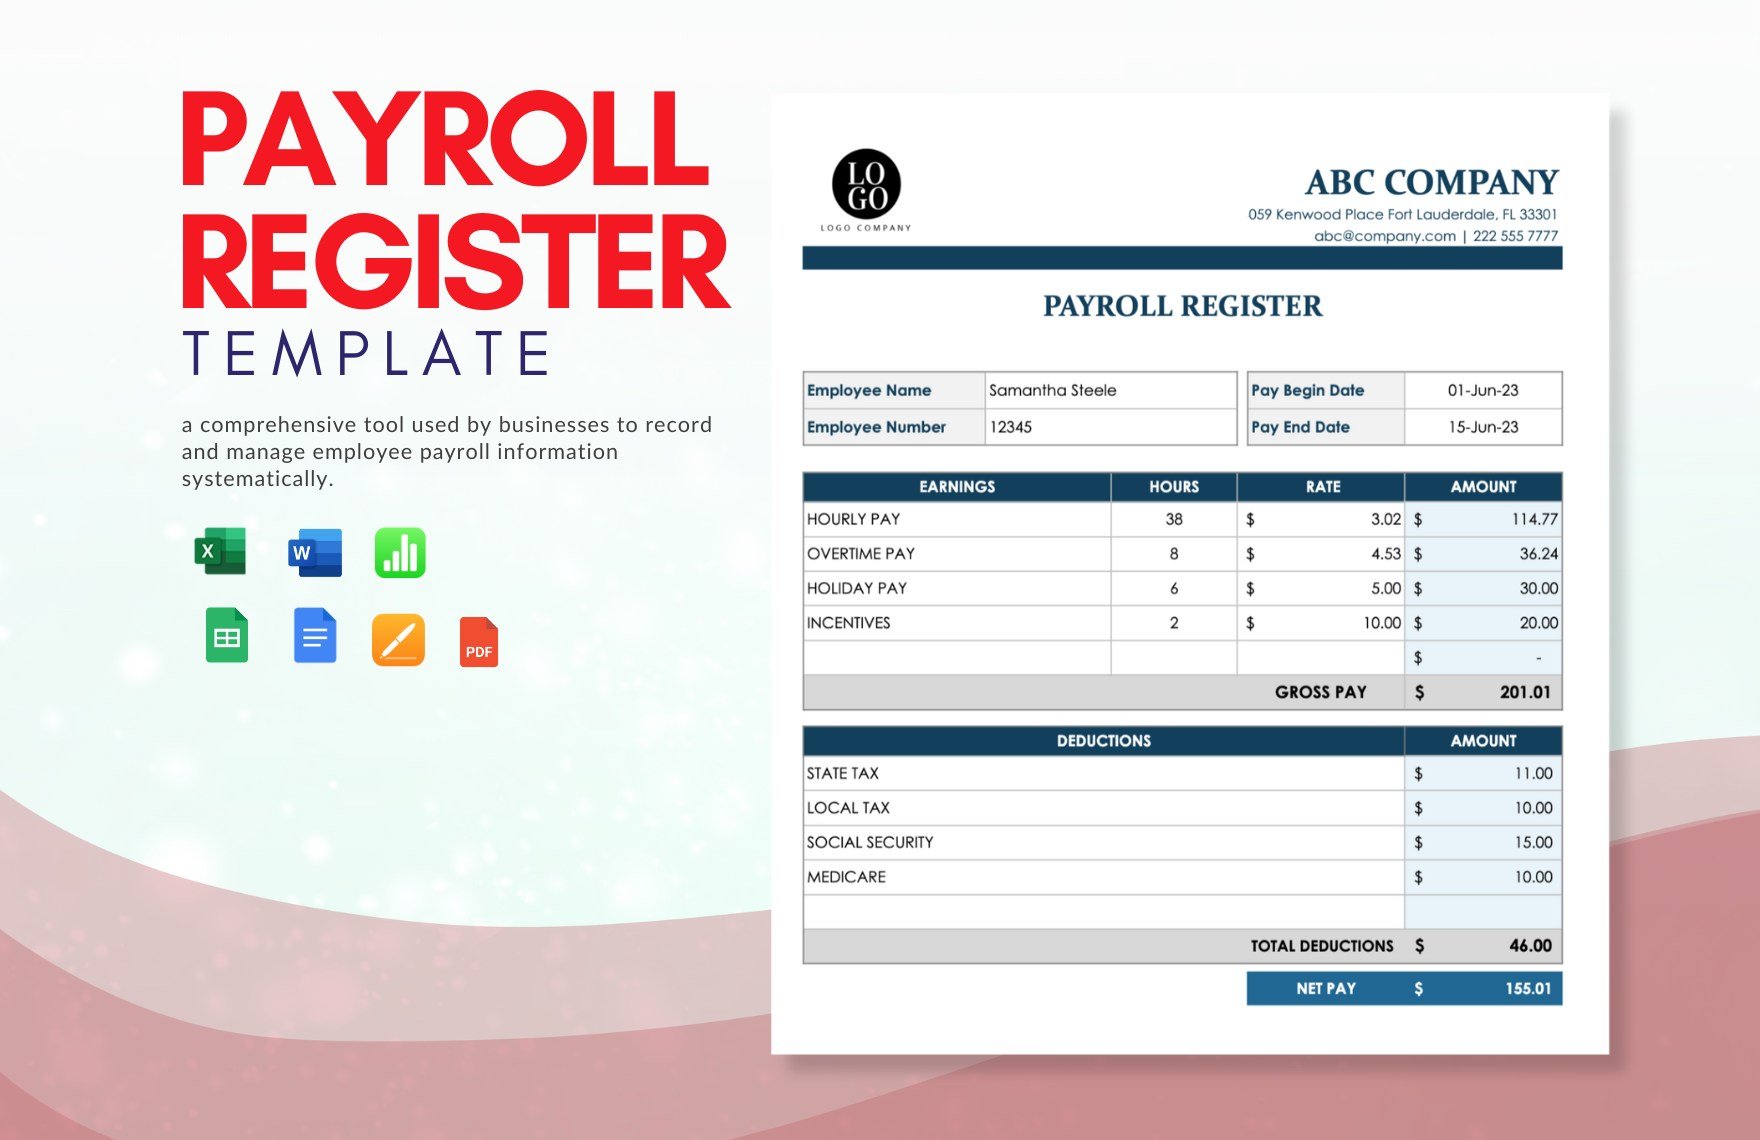 Payroll Register Template in Word, Google Docs, Excel, PDF, Google Sheets, Apple Pages, Apple Numbers